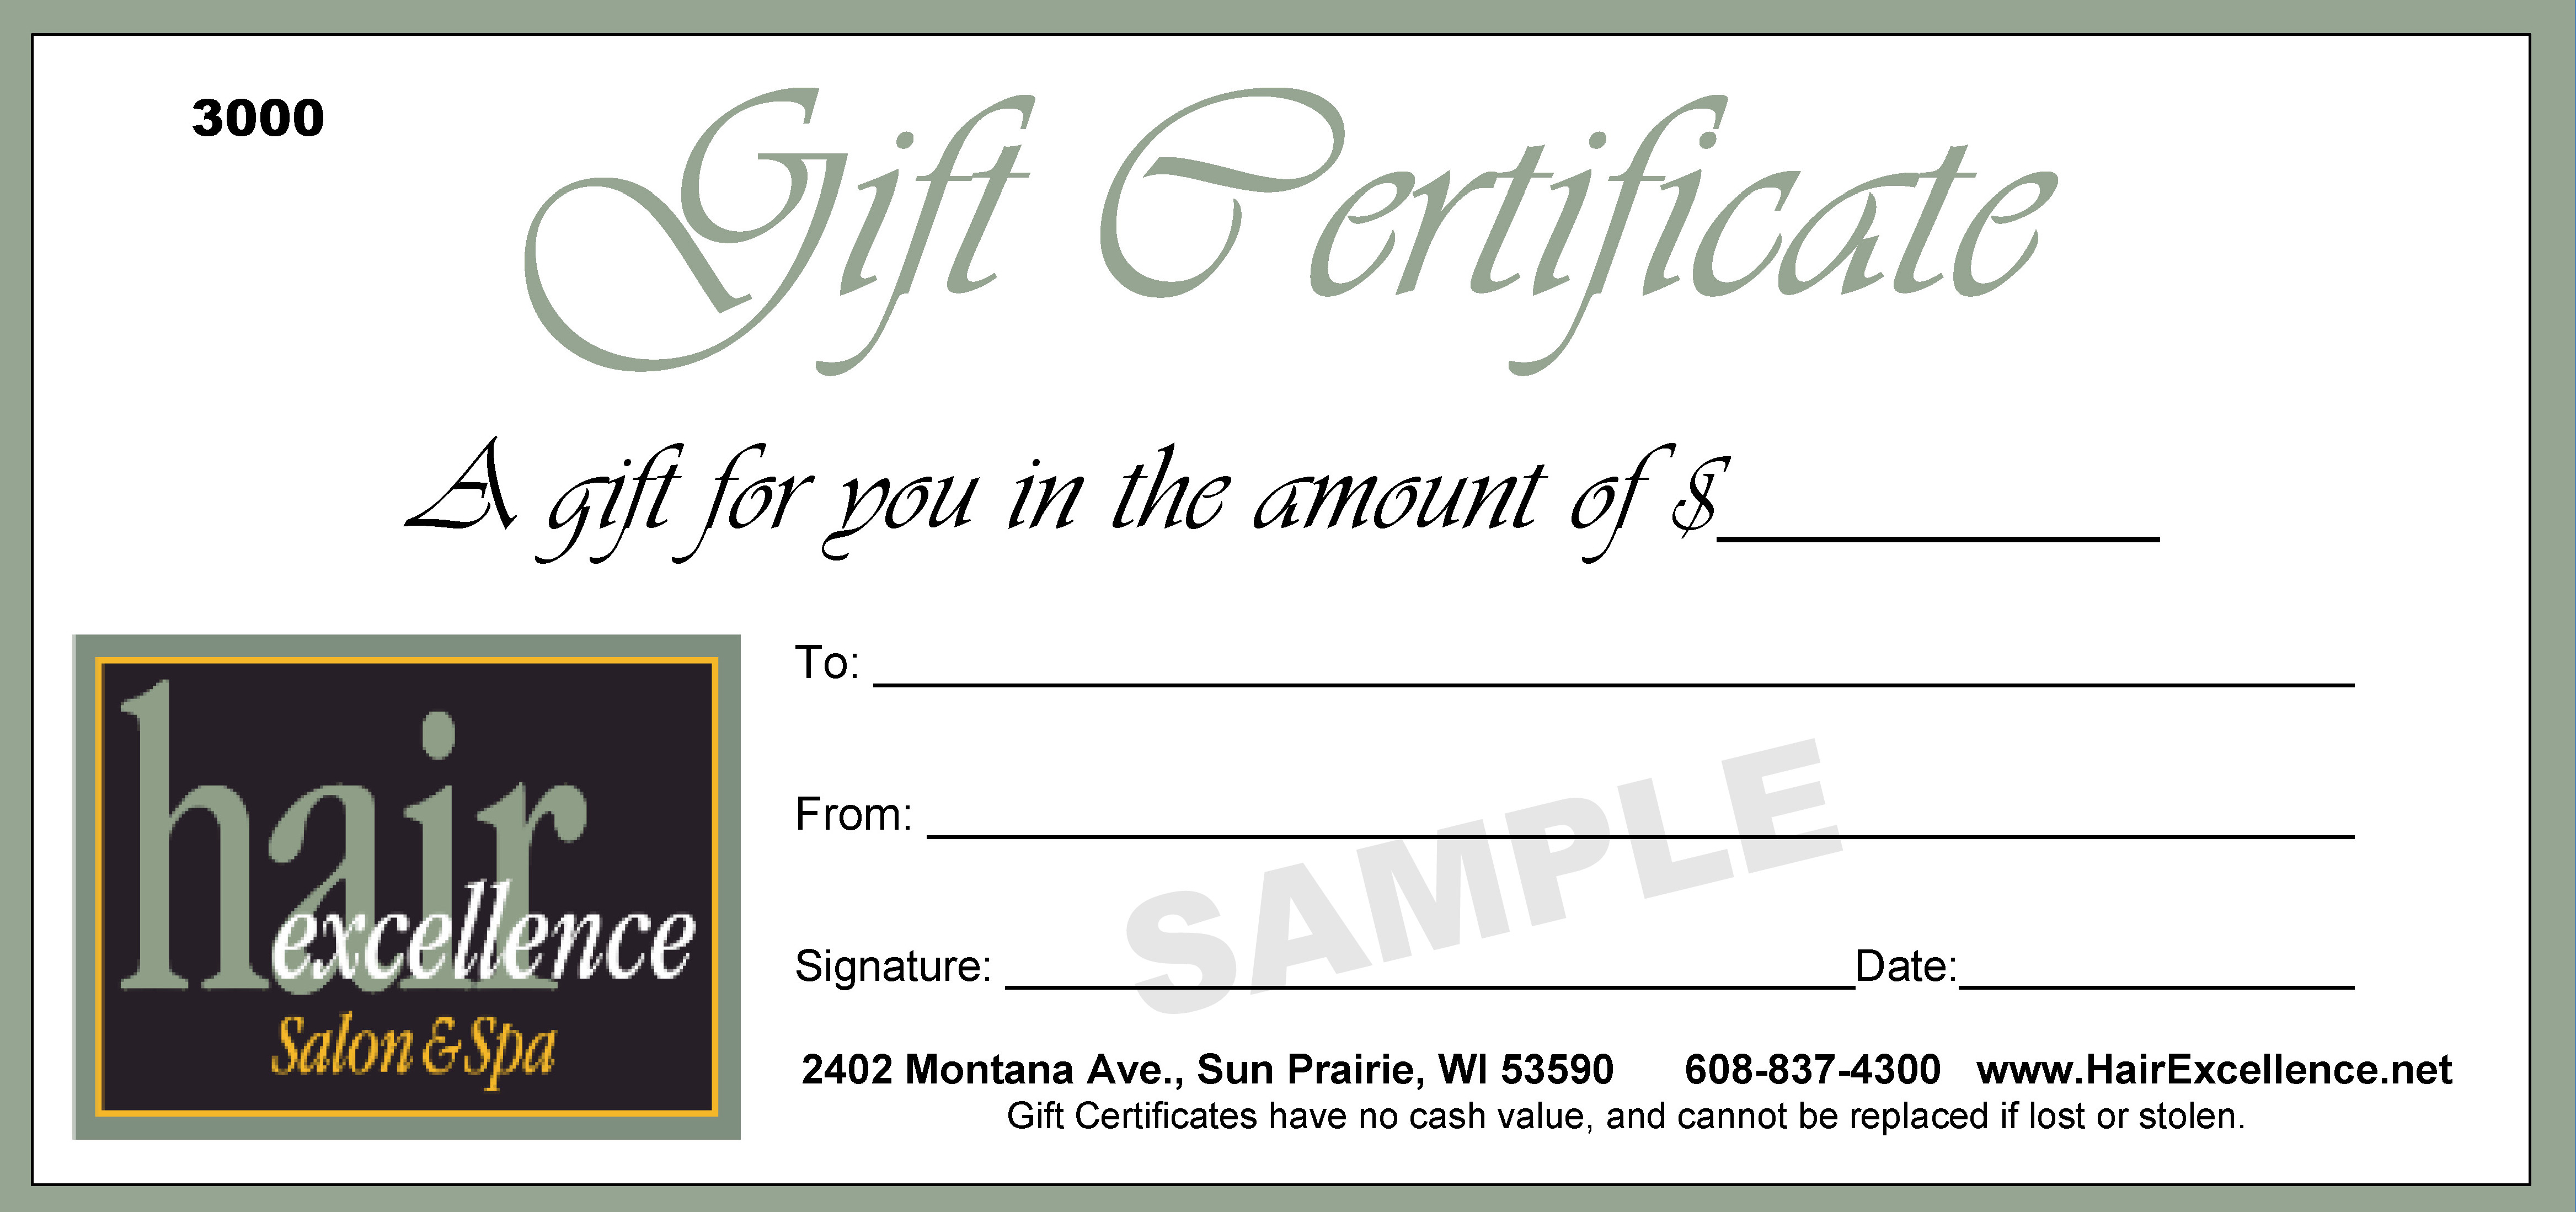 Hair Salon Gift Certificate Template Free from www.hairexcellence.net